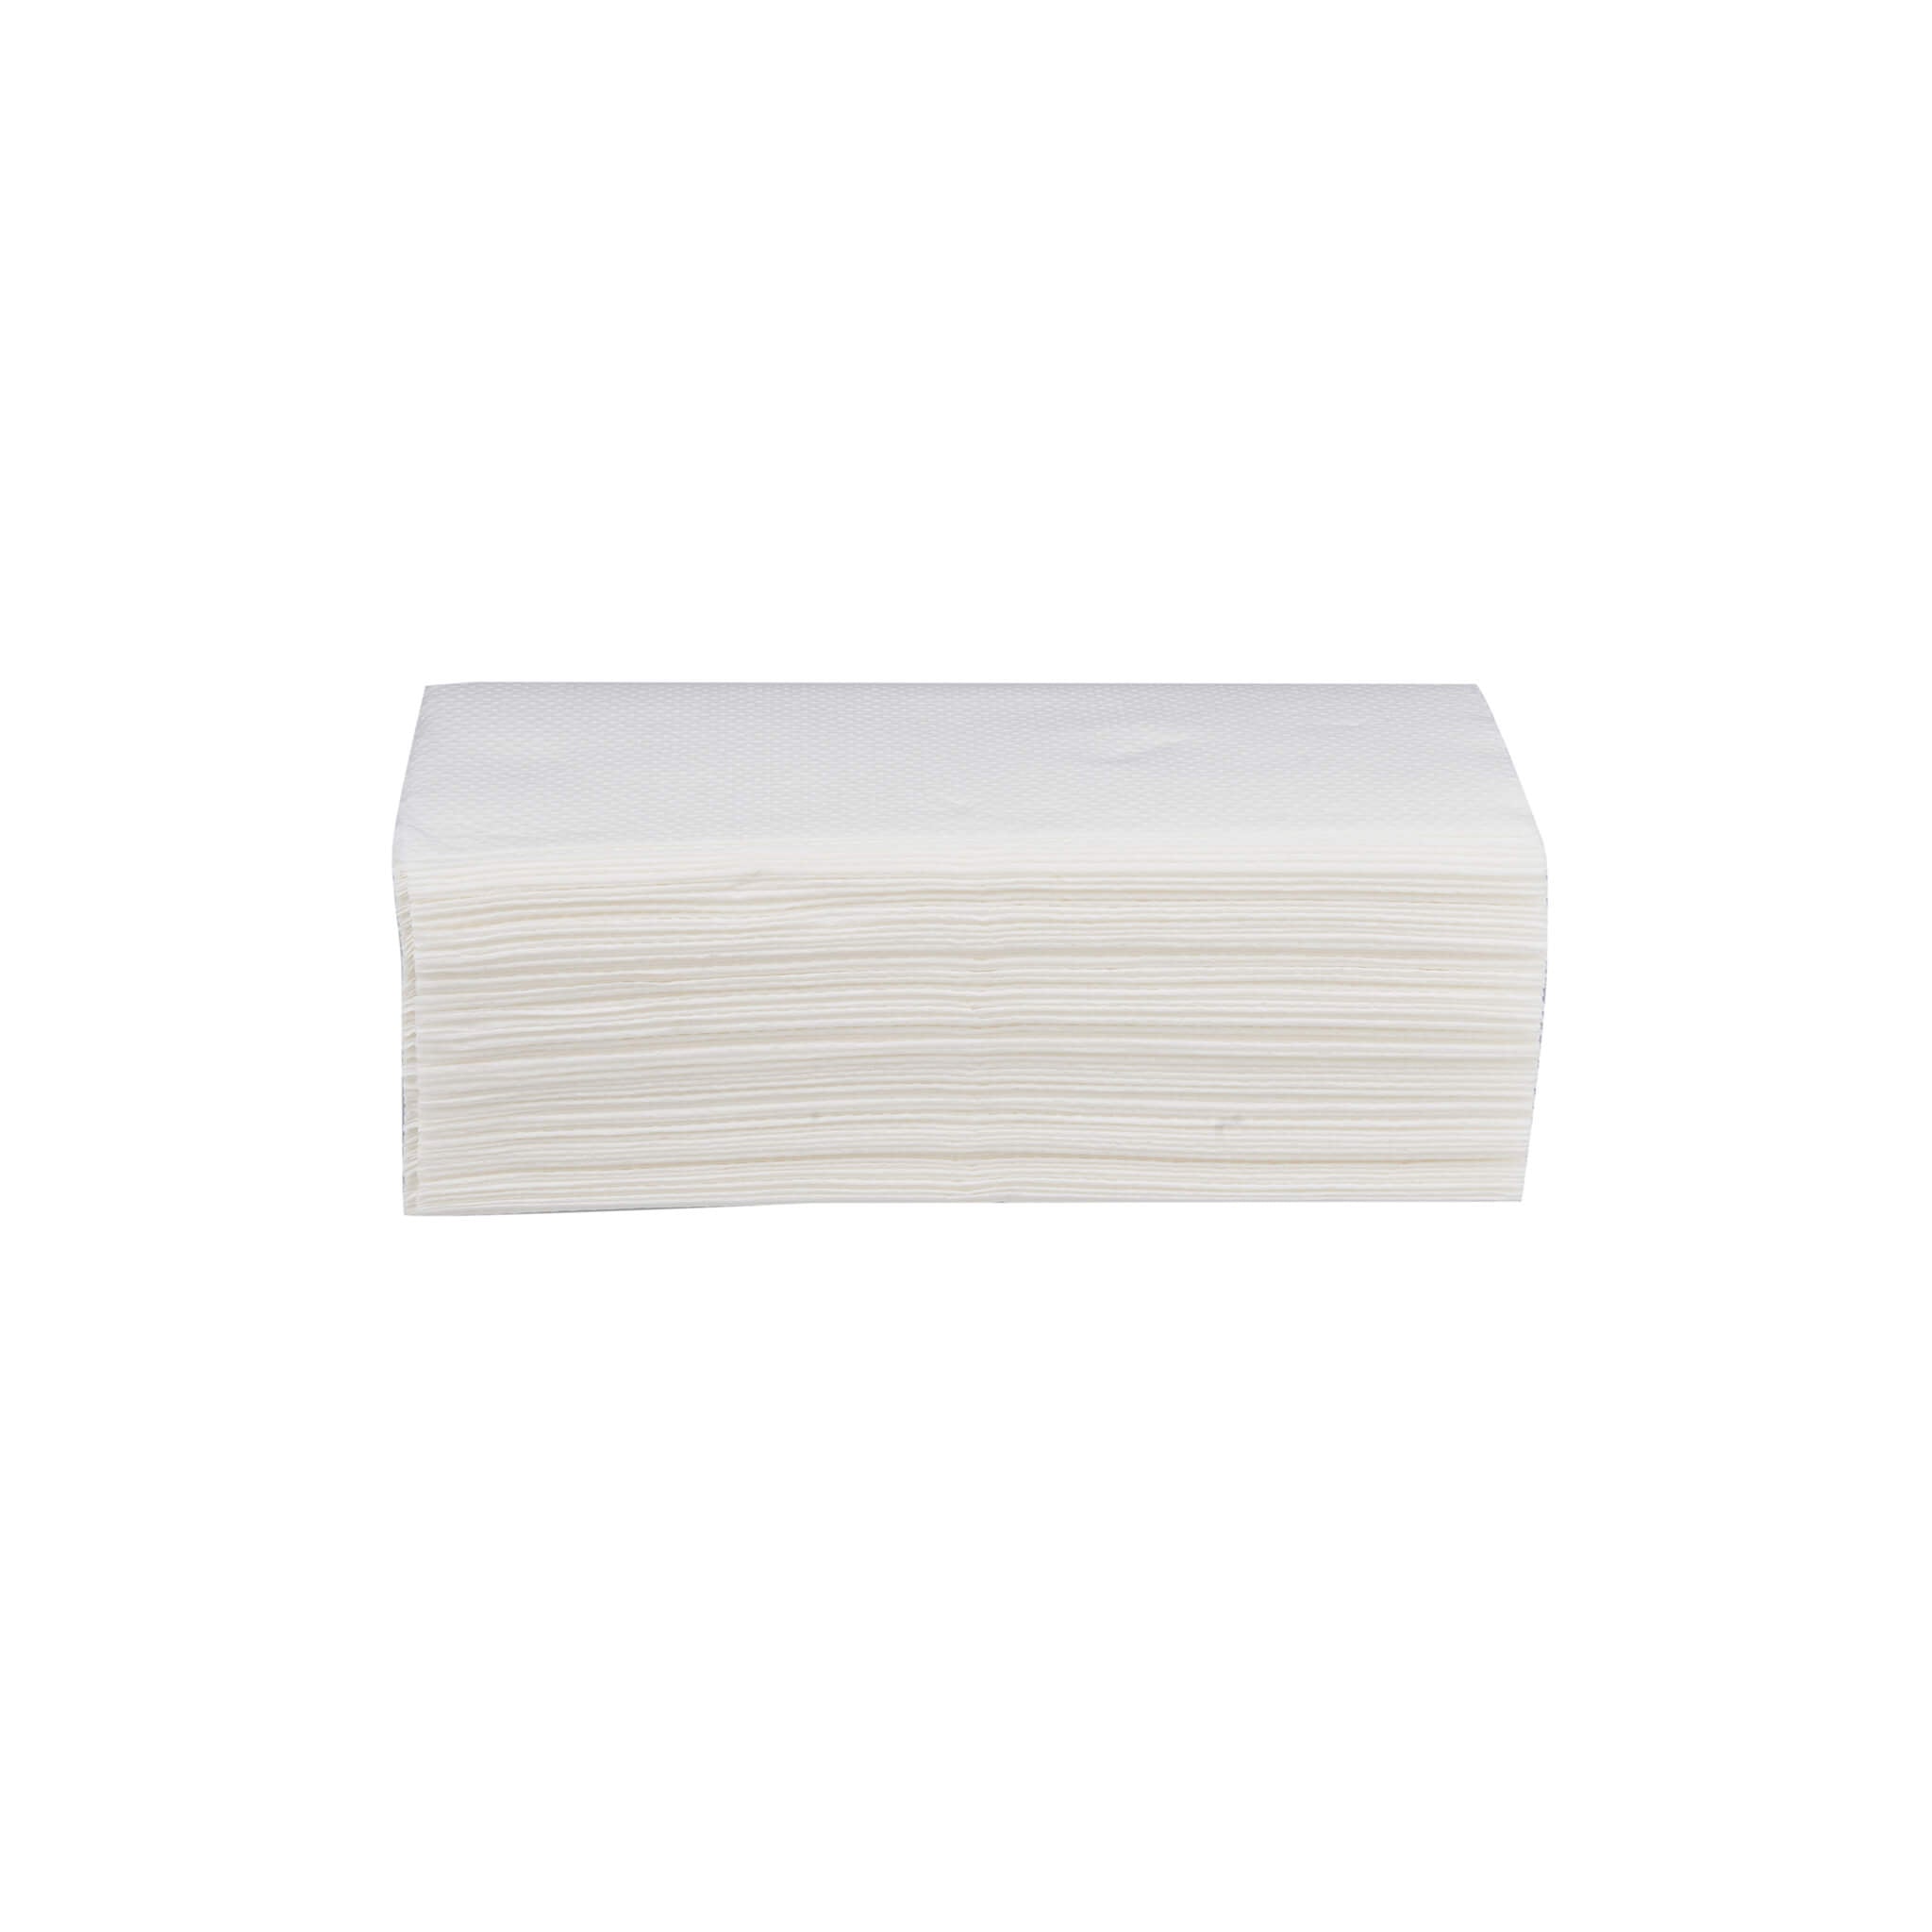 Soft n Cool V Fold 1 Ply Tissue 3000 Pieces - Hotpack Global